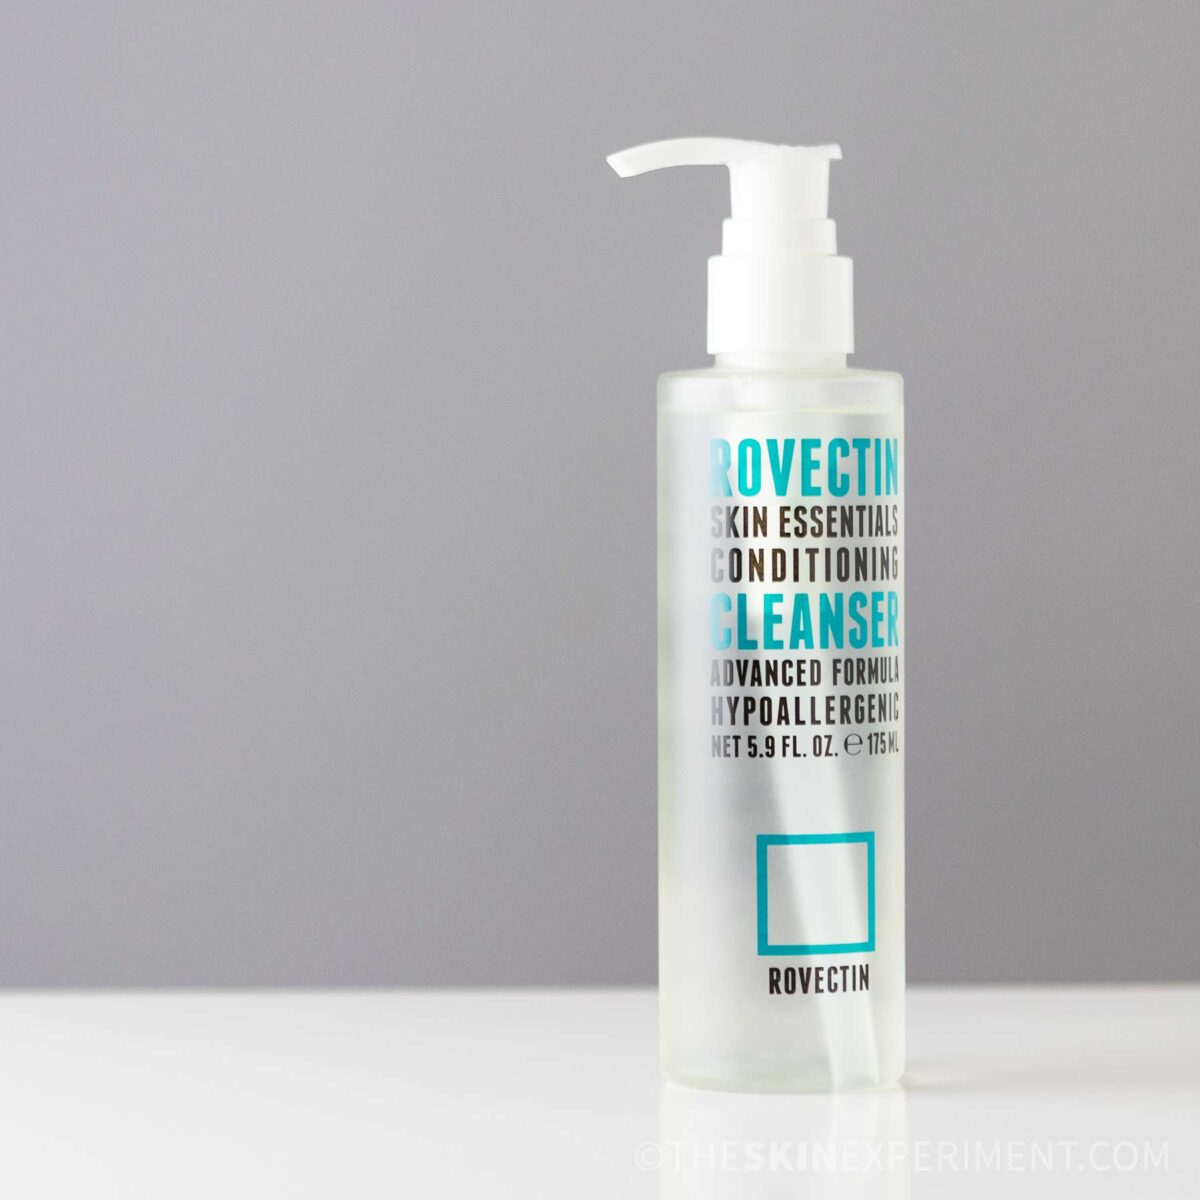 Rovectin Skin Essentials Conditioning Cleanser Review